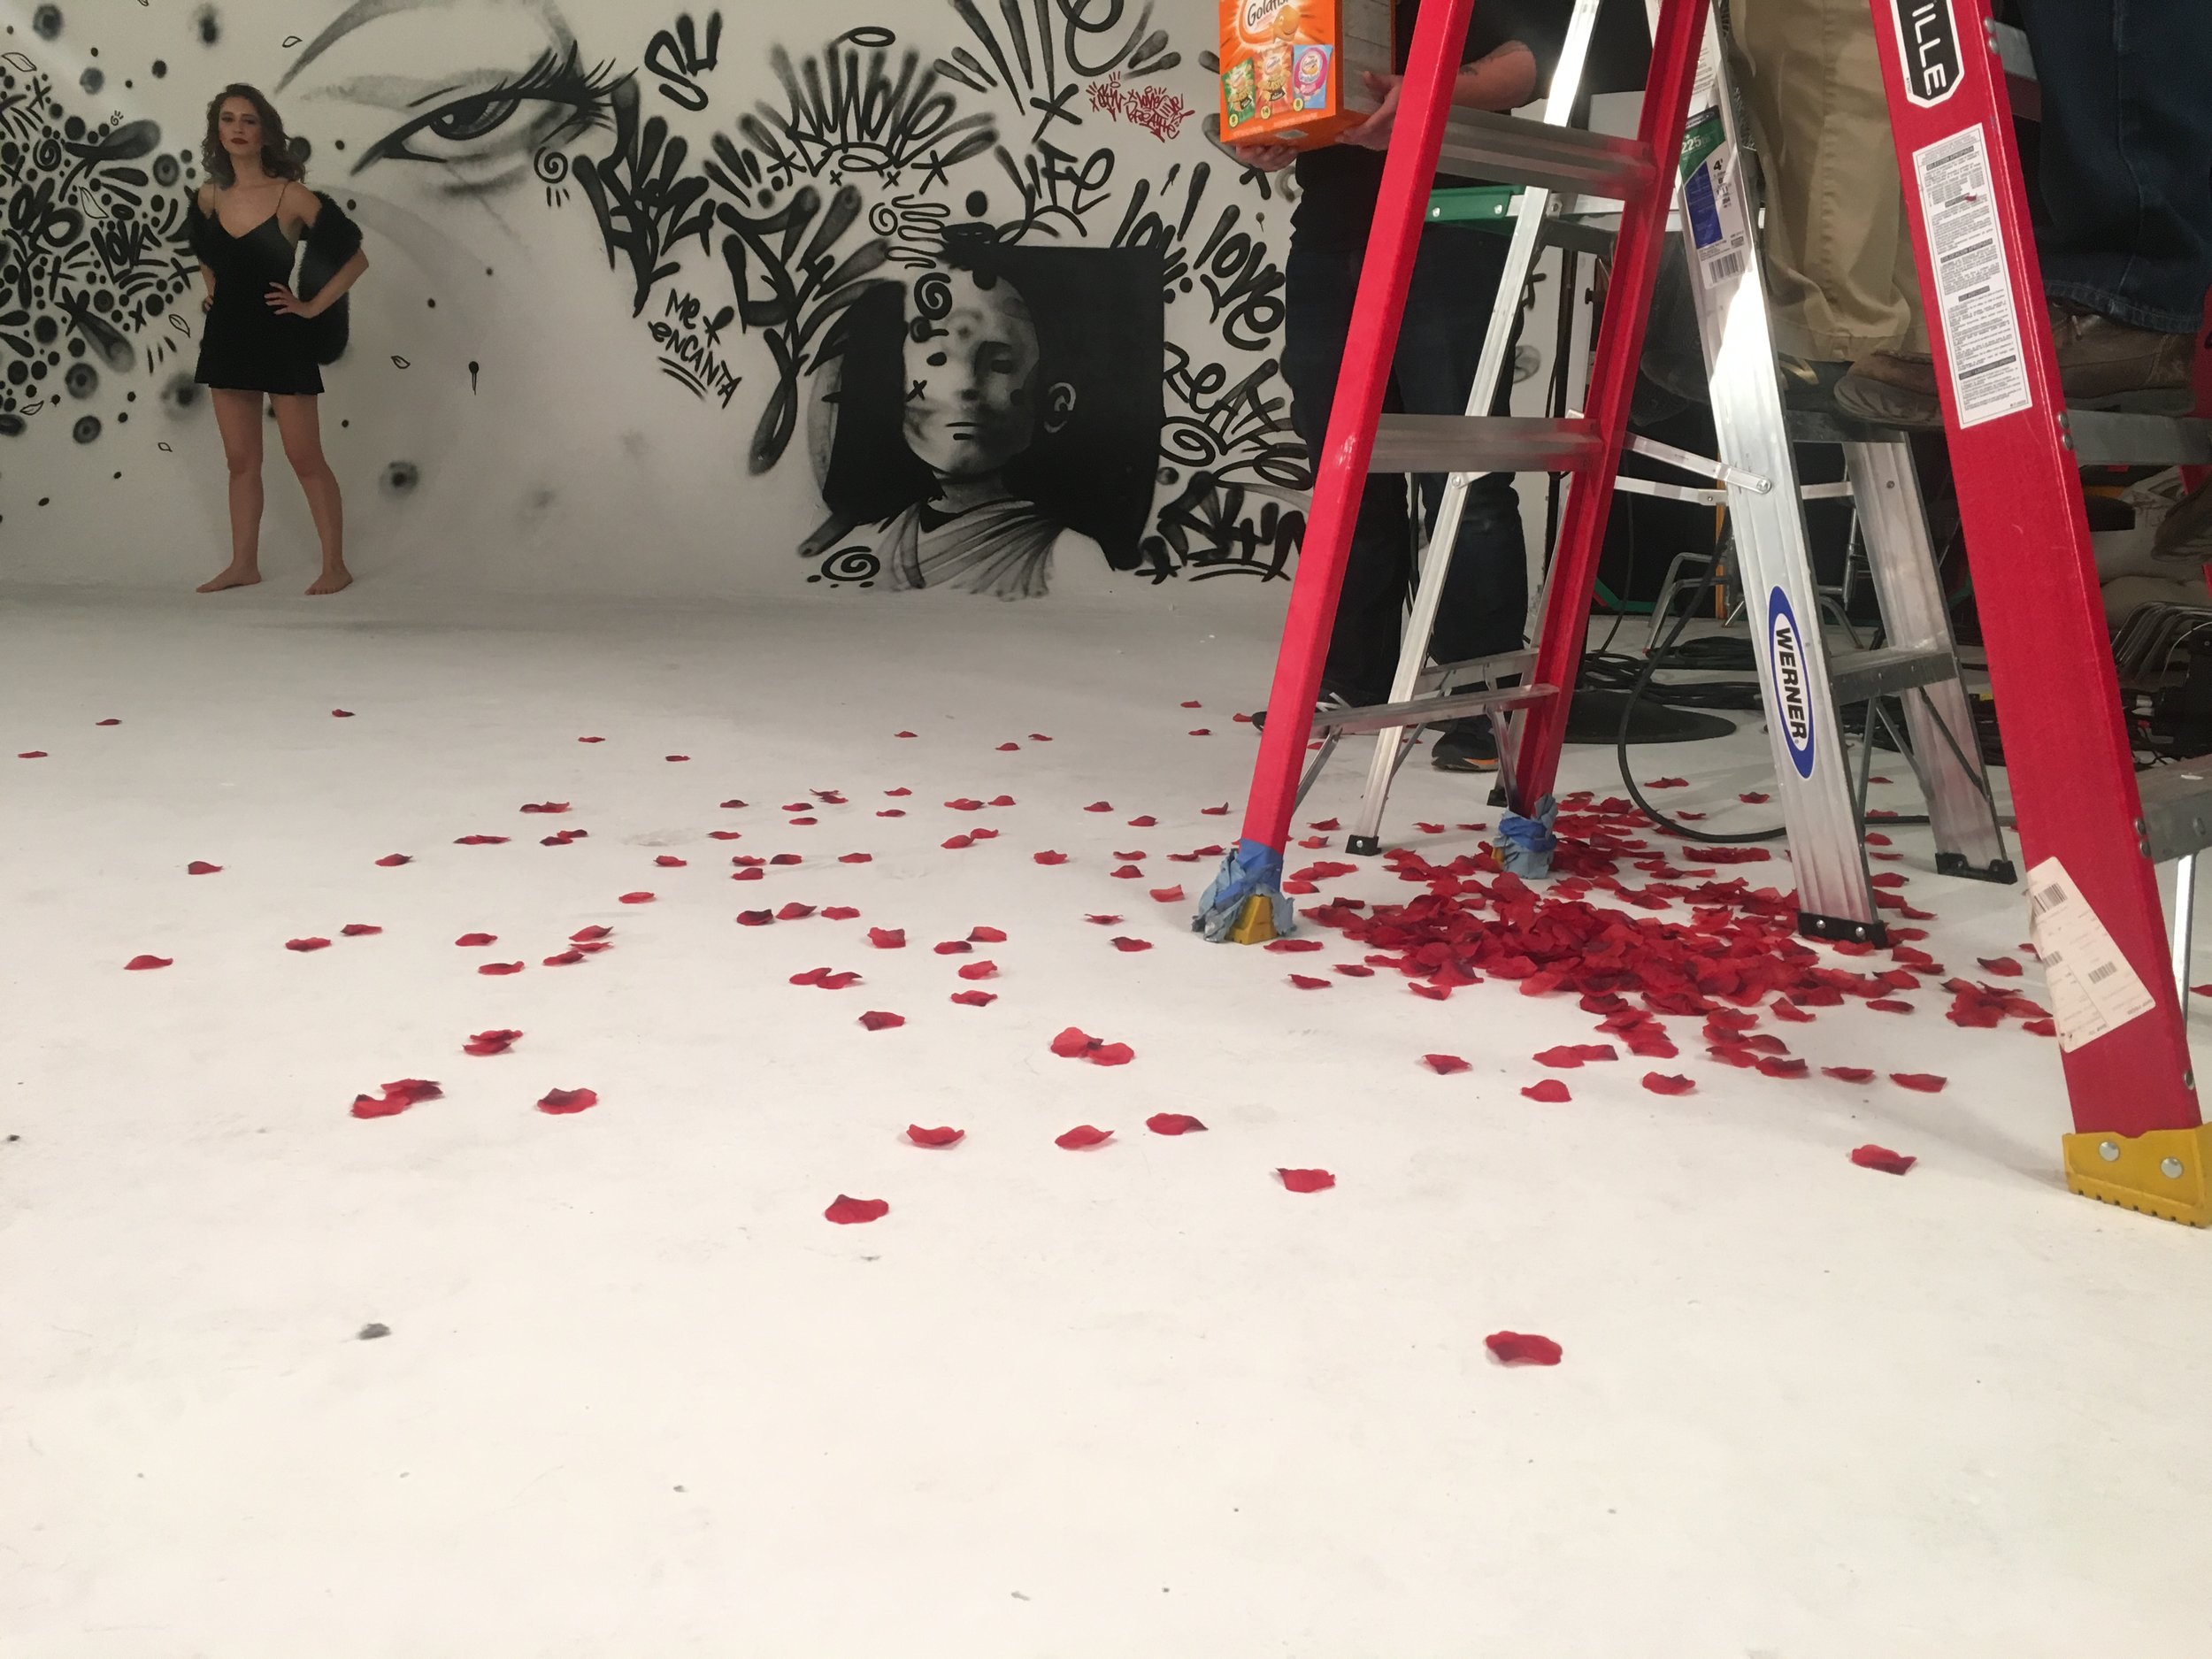 mikaella-ashley-musicvideo-mural-nycproduction-arri.jpg